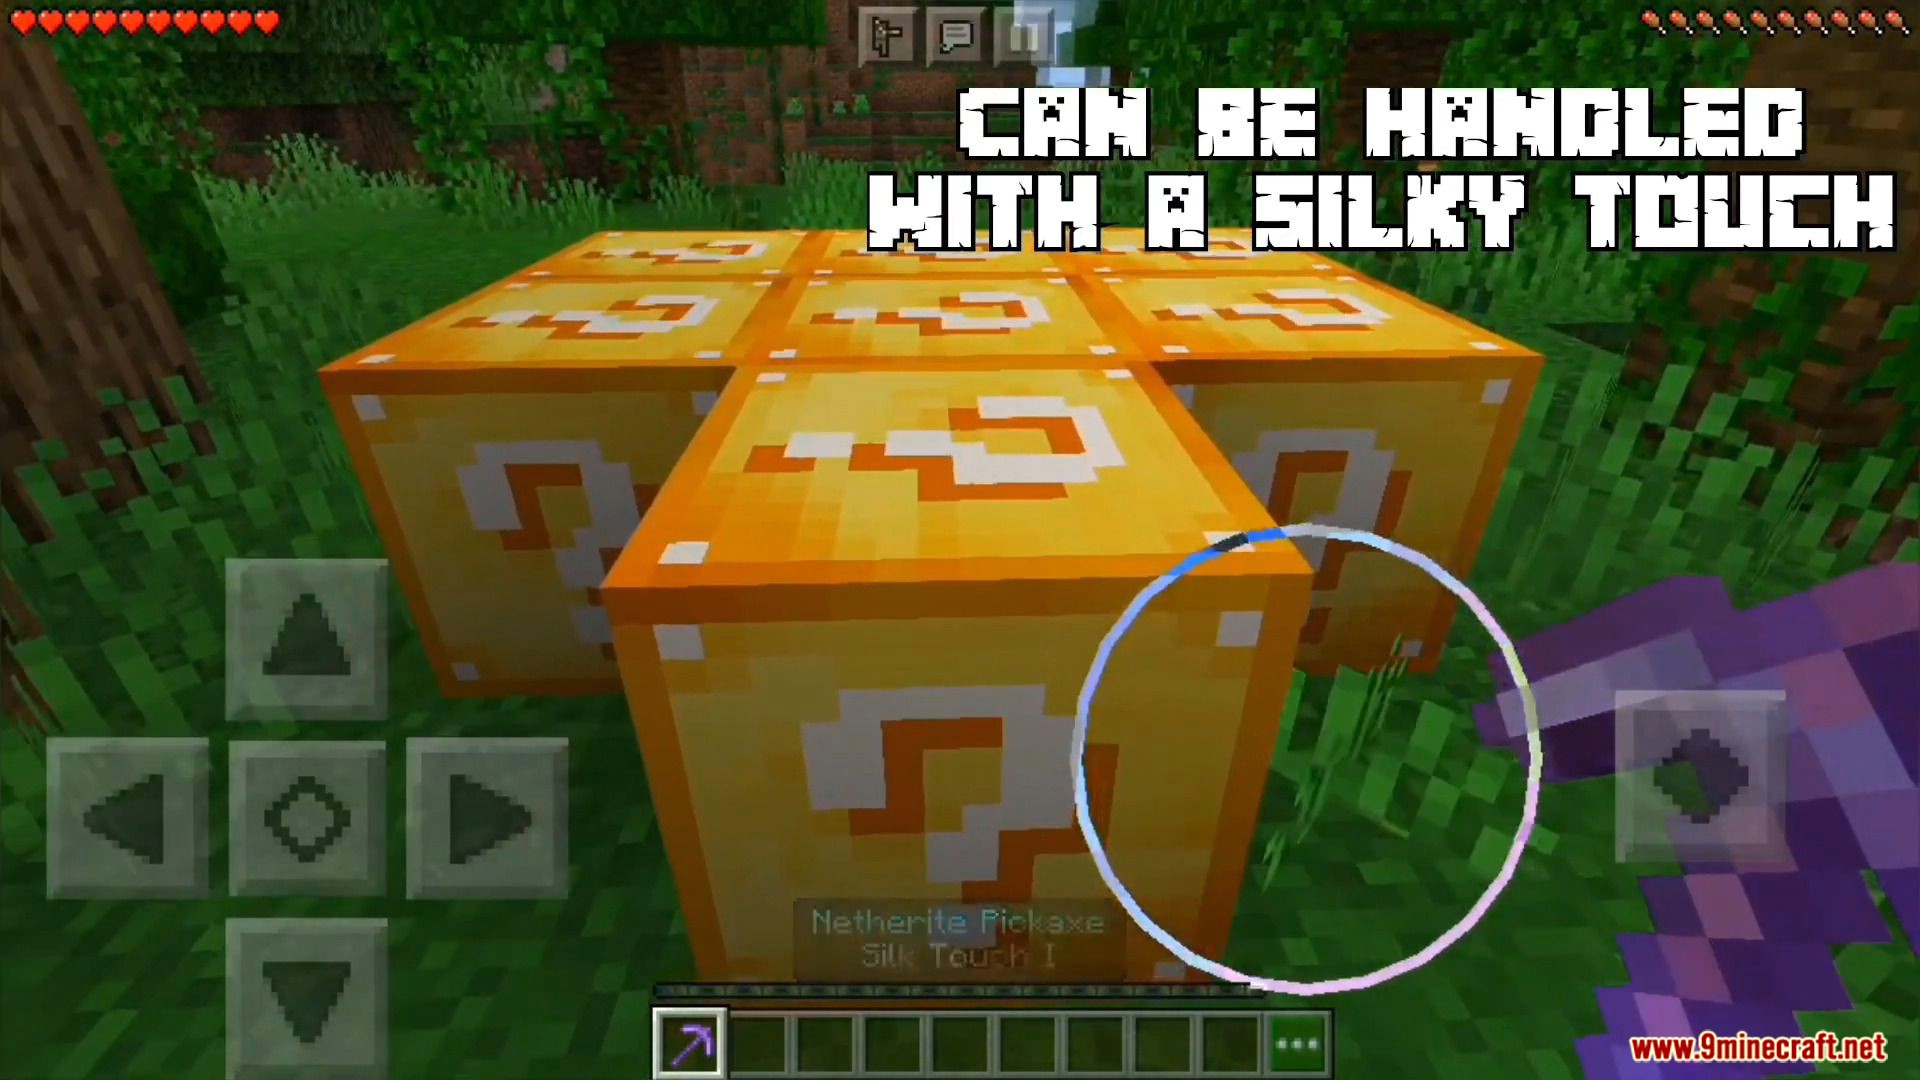 Ultimate Lucky Block Addon For Minecraft PE 1.20.15, 1.19.83